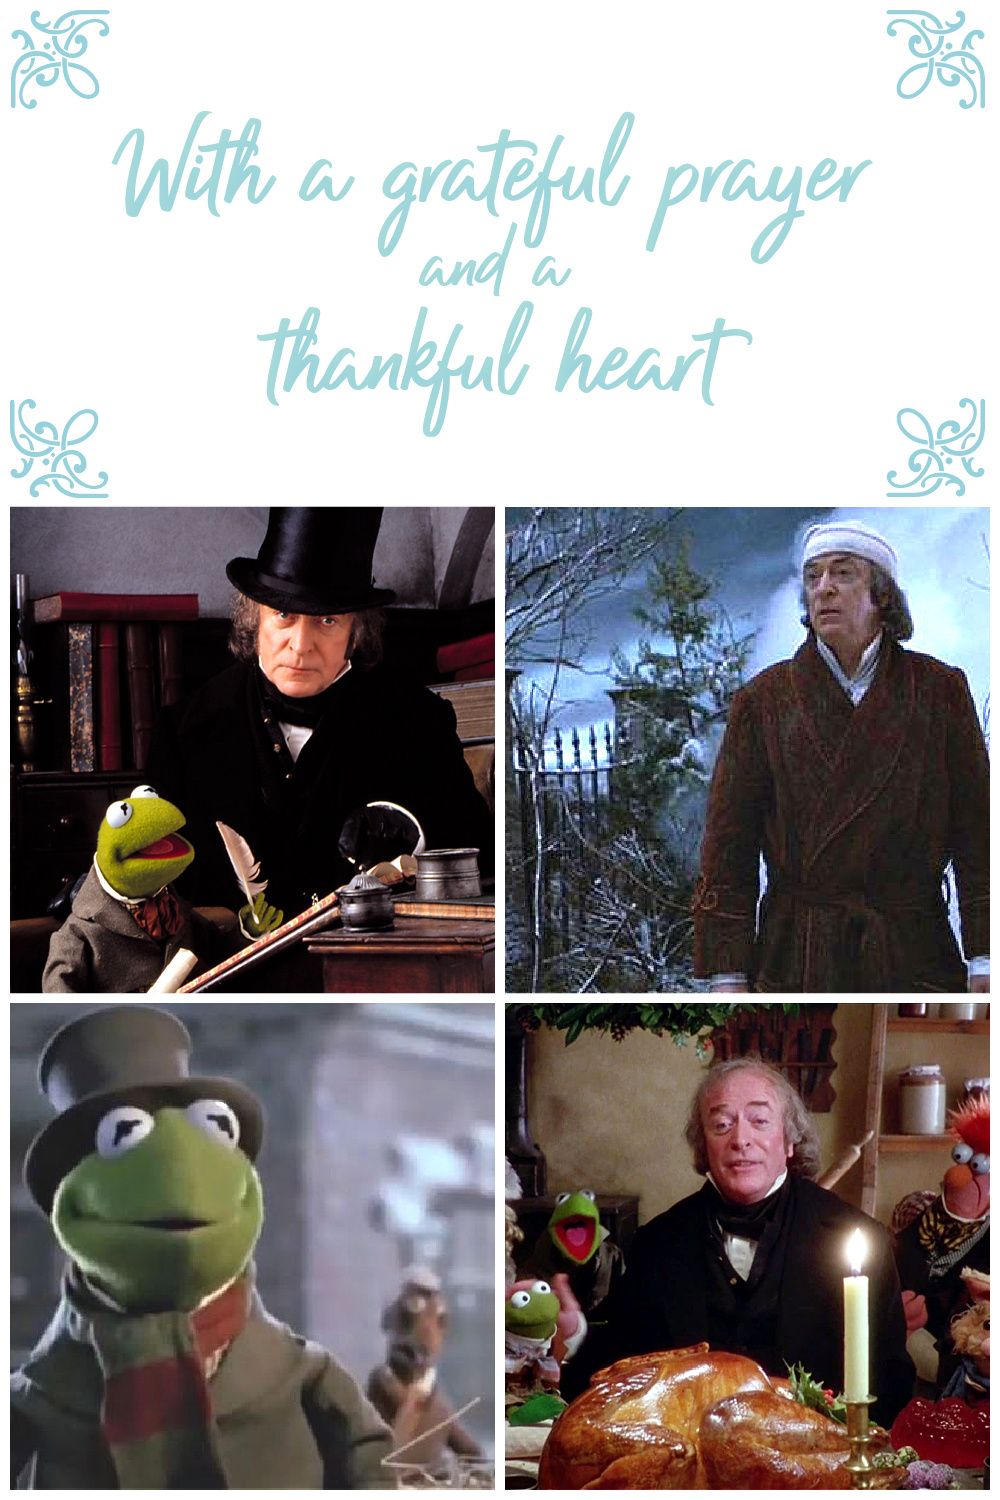 As you may have guessed, the name for this blog comes from one of my favorite Christmas movies, Muppet's Christmas Carol. The story of a changed heart and a second chance echo's the message of hope we can have through Christ. I love Michael Caine's portrayal of Scrooge.